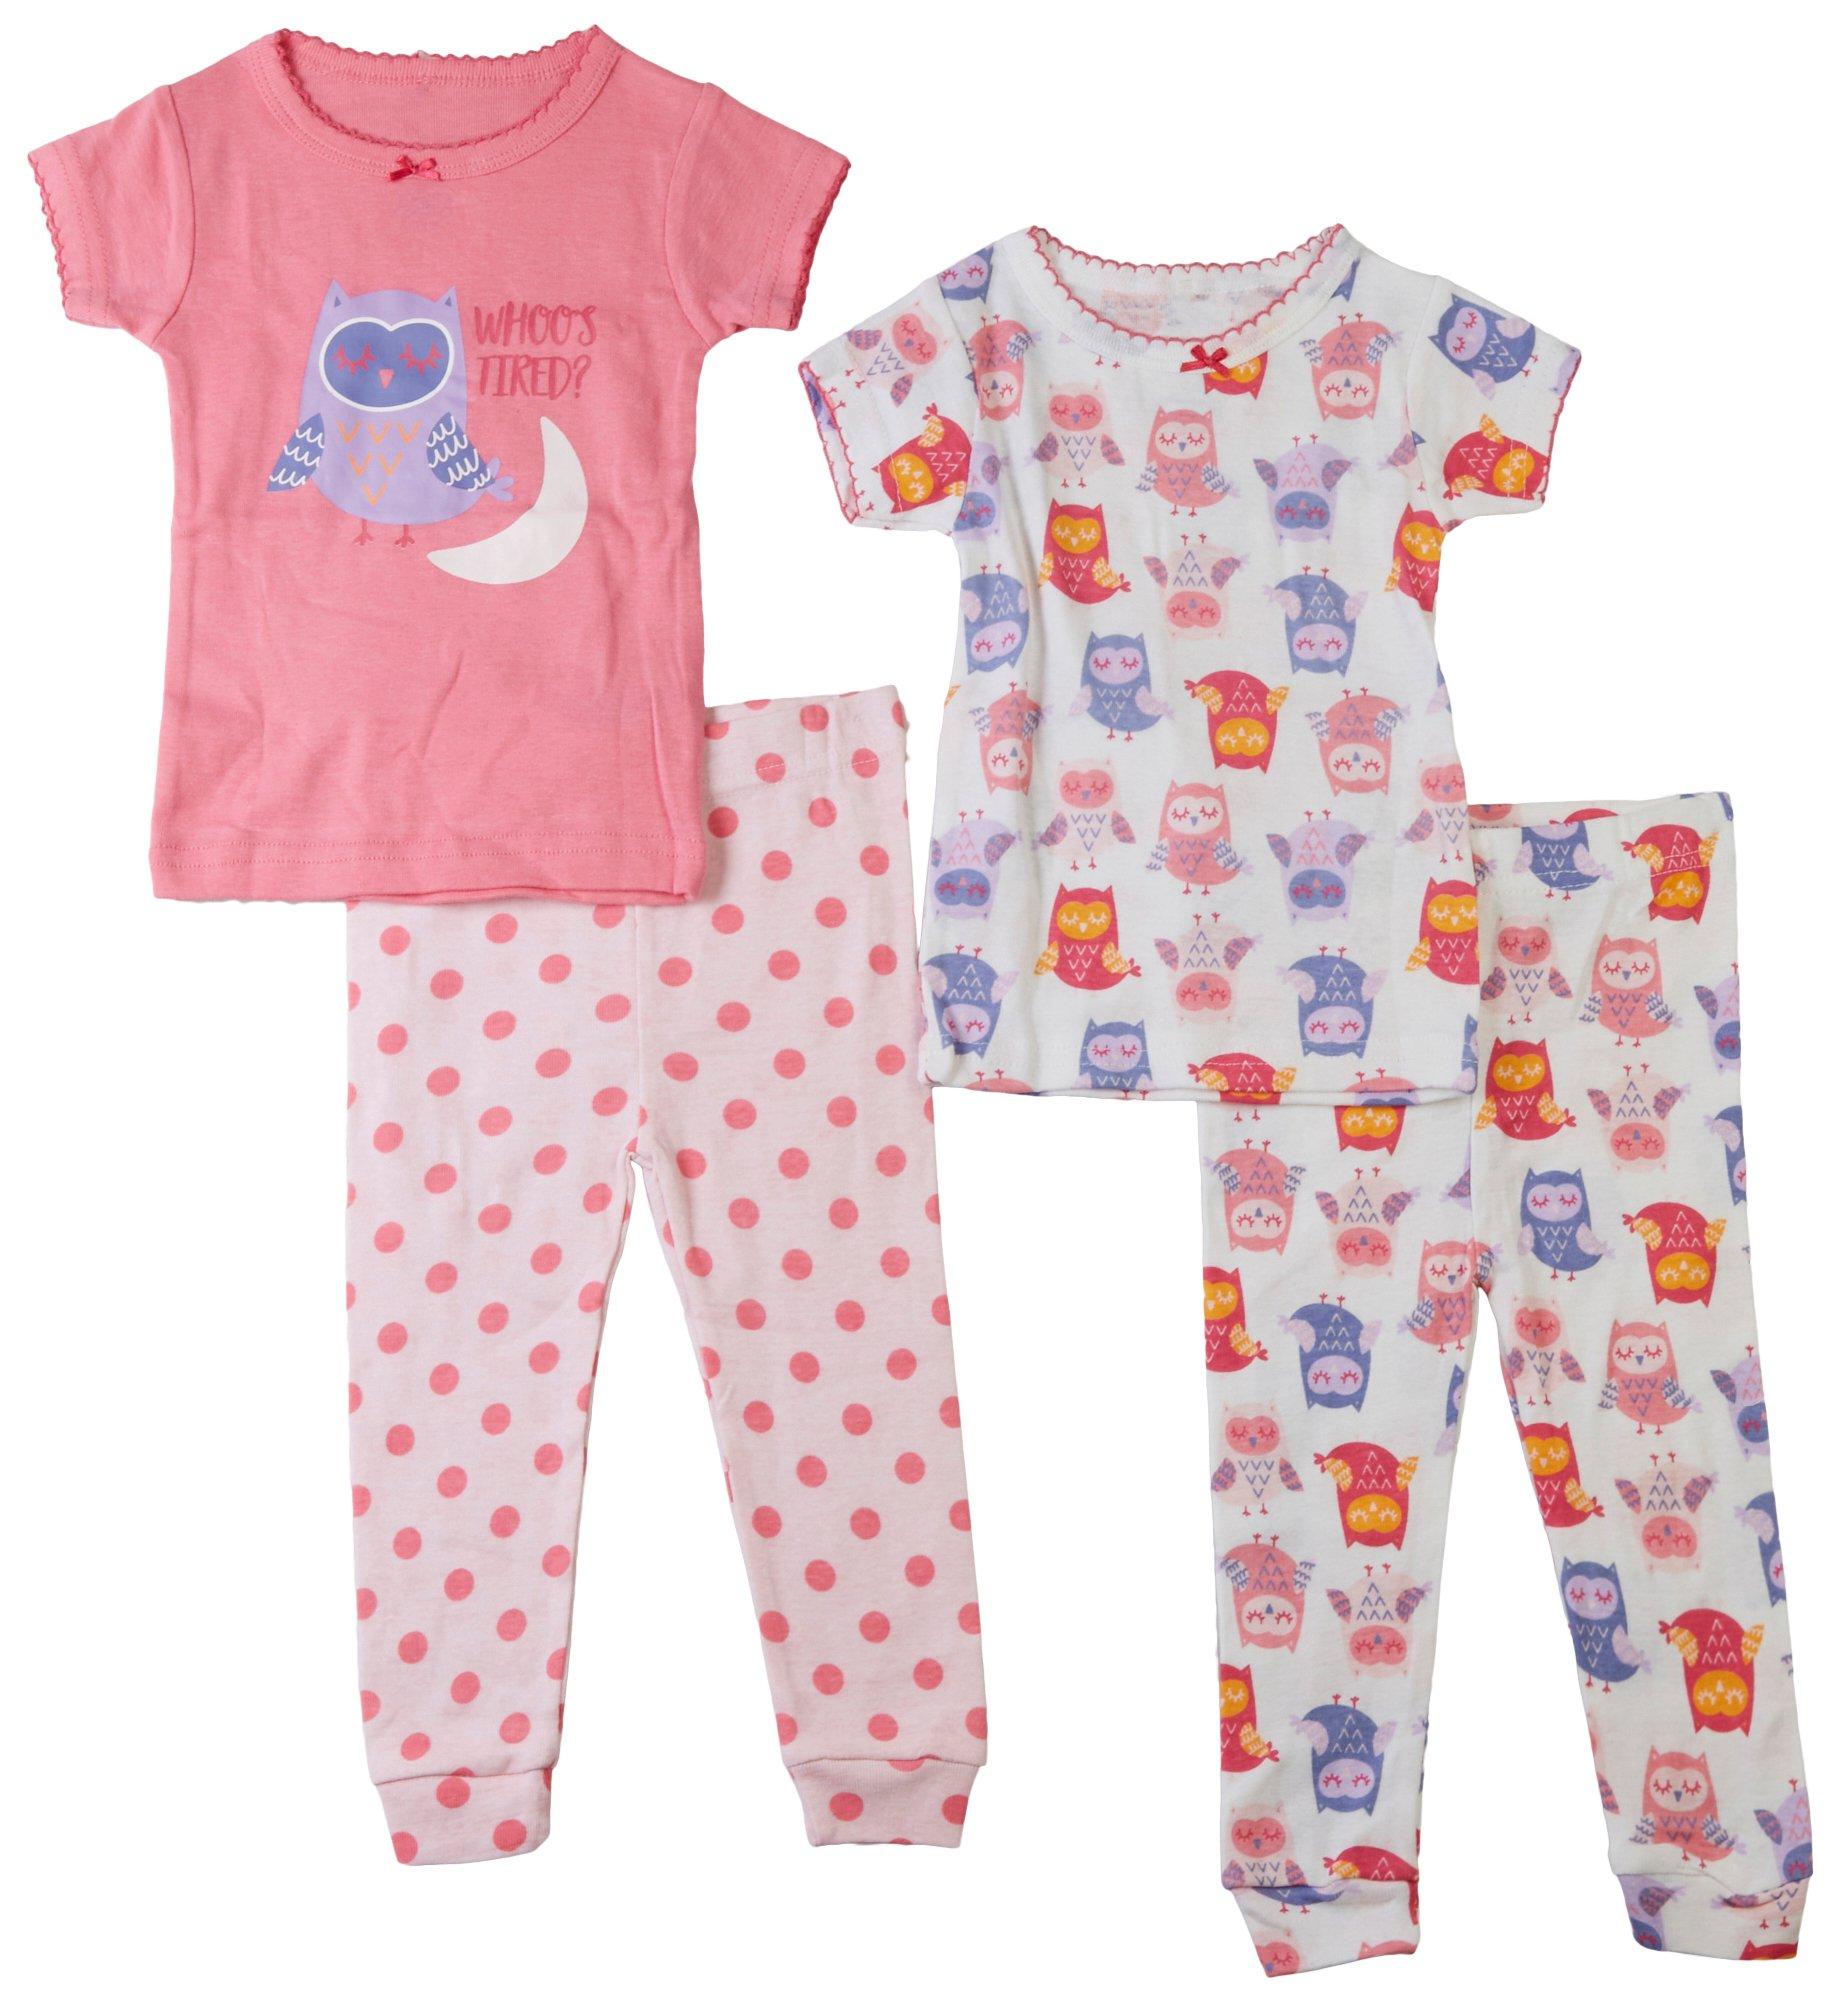 Cutie Pie Baby Baby Girls 4 pc. Whoos